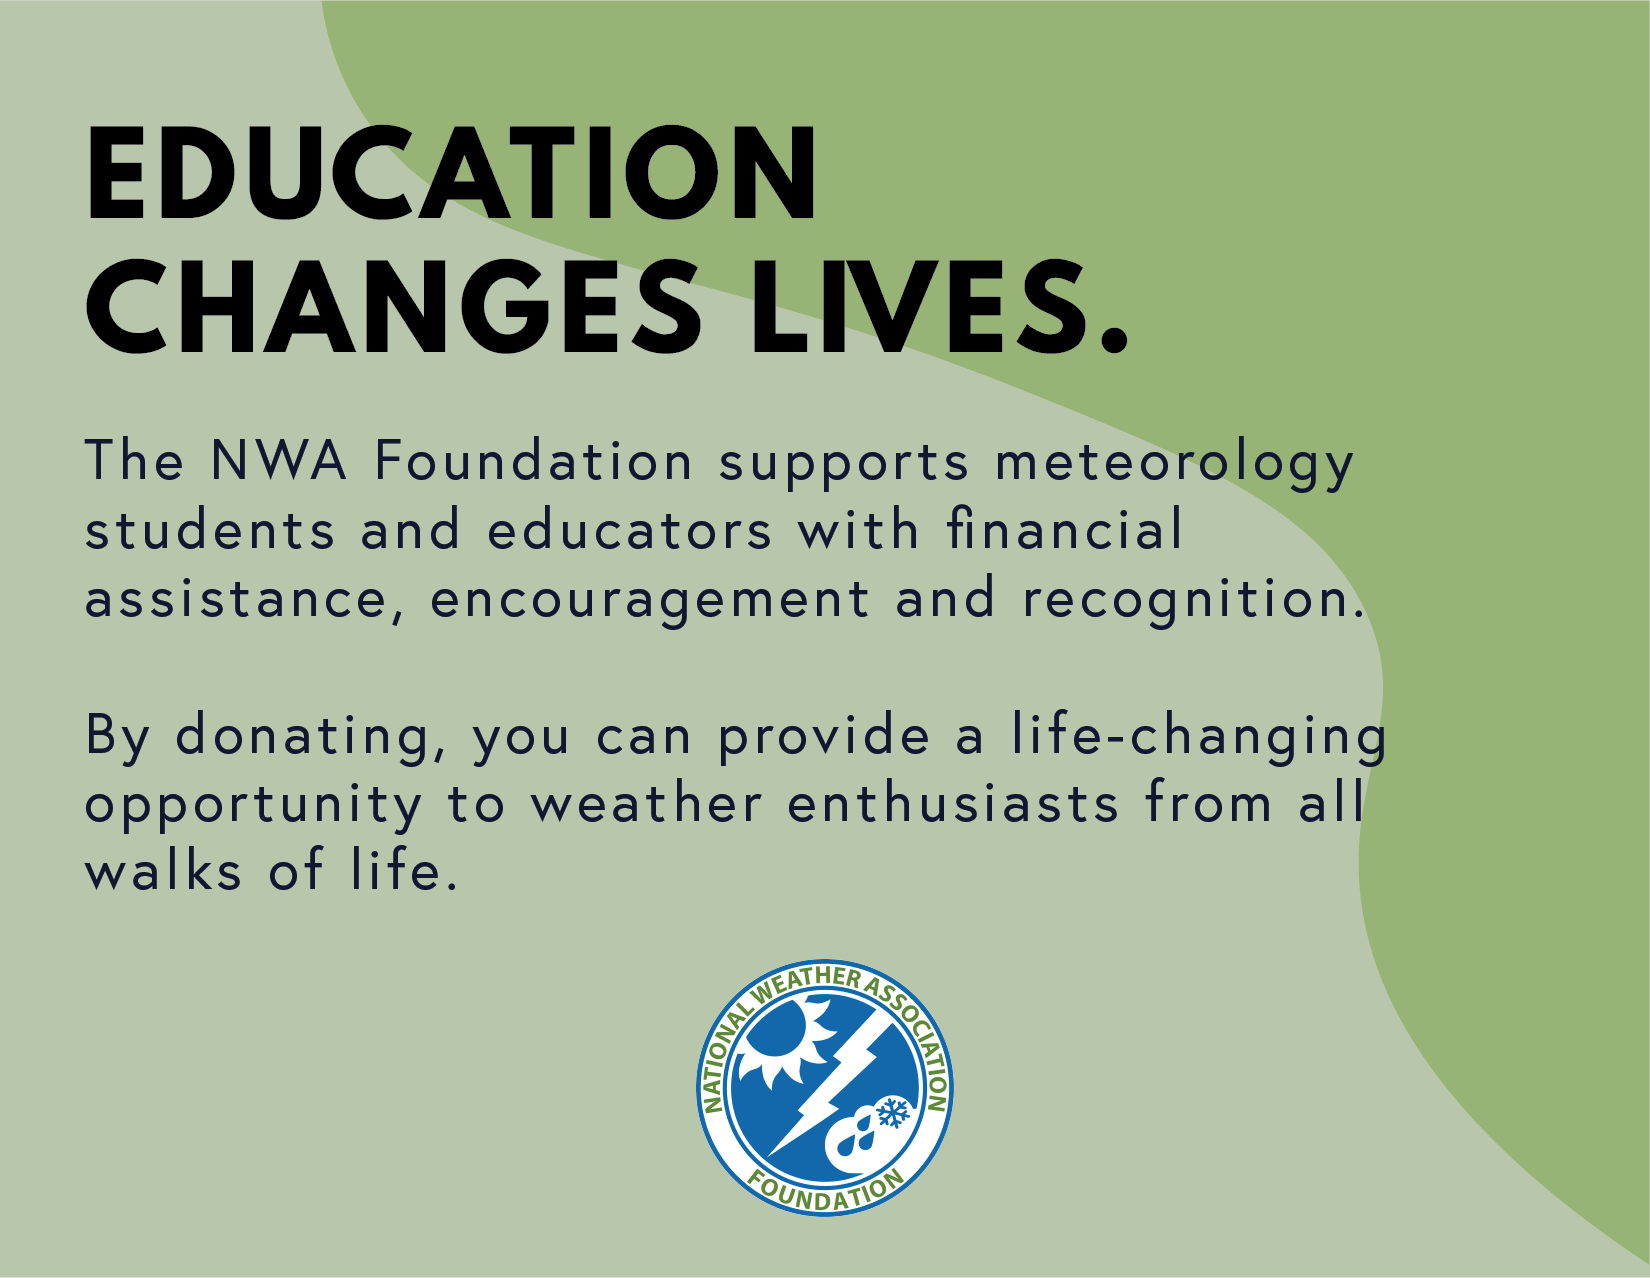 Education Changes Lives. The NWAFoundation supports metorology students and educators with financial assistance, encouragement and recognition.